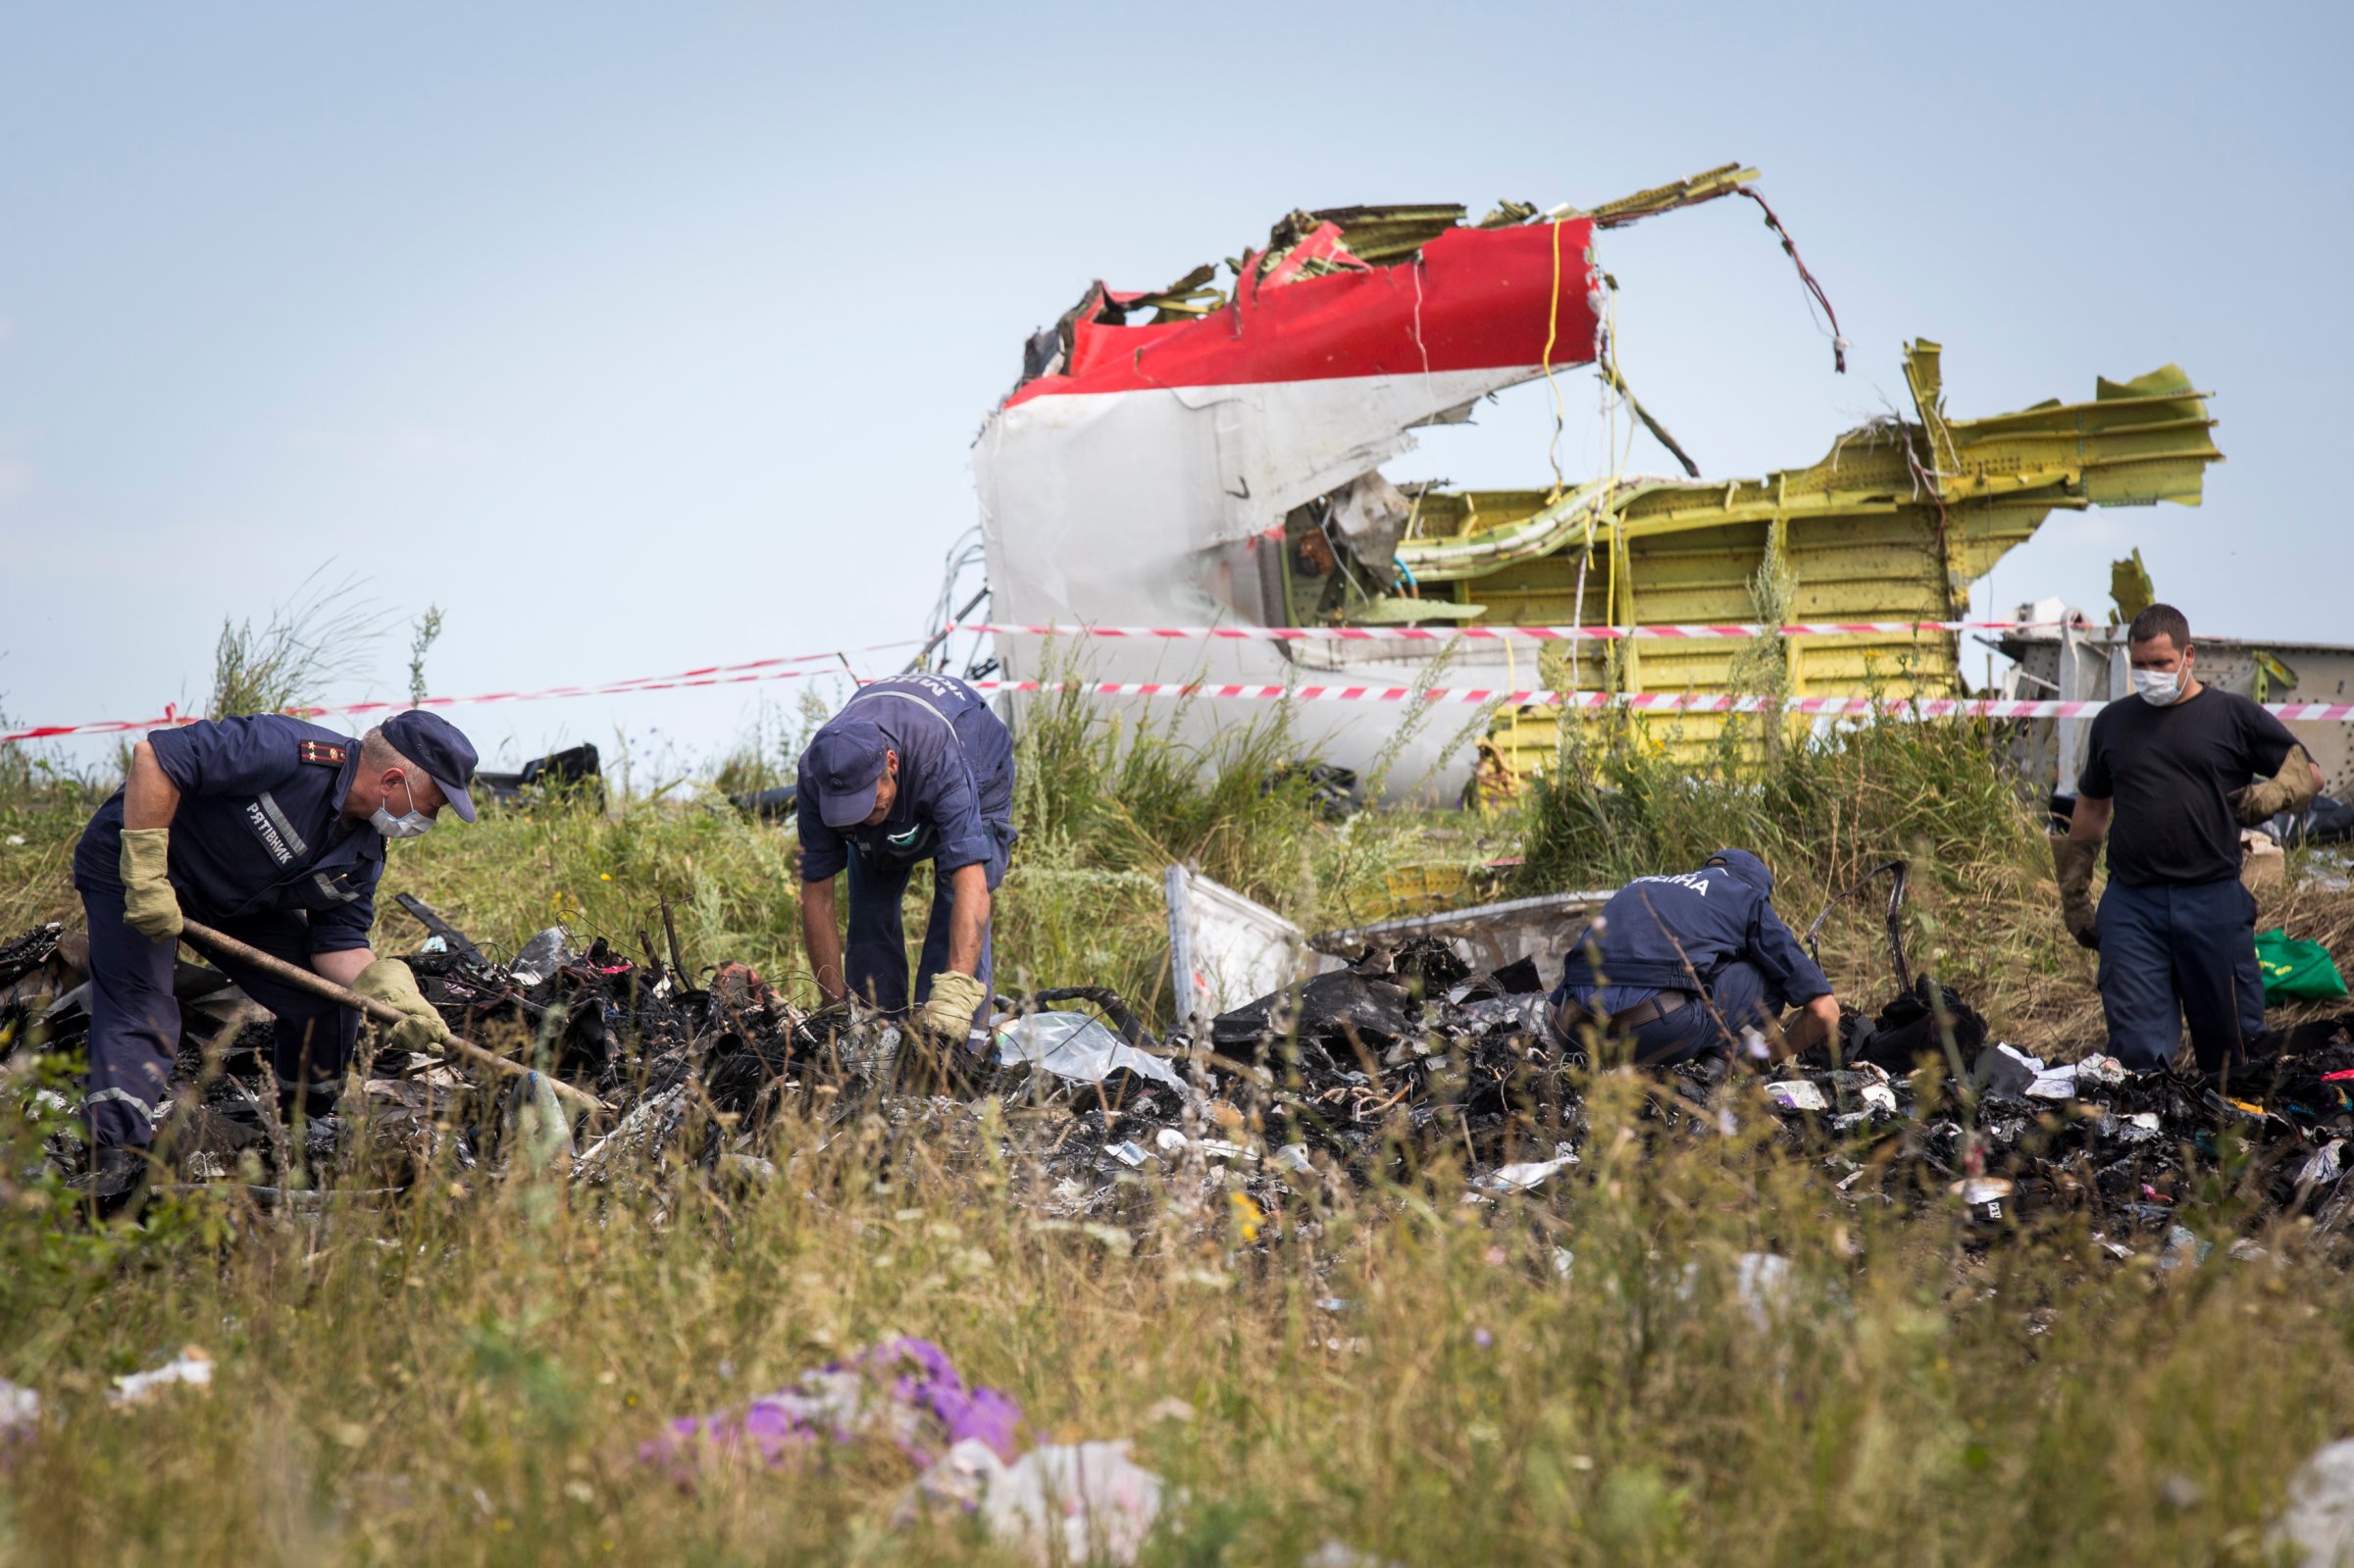 298 Crew And Passengers Perish On Flight MH17 After Suspected Missile Attack In Ukraine